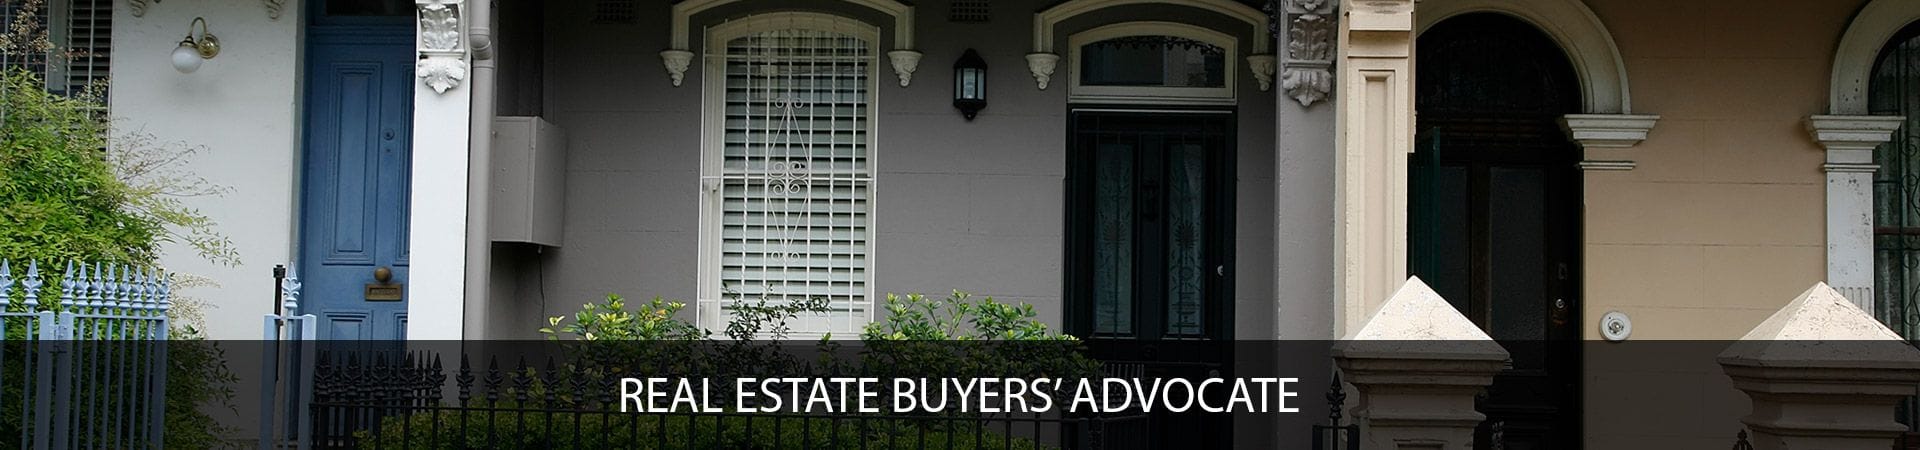 Peter Masia | Professional Real Estate Buyers Advocate Sydney